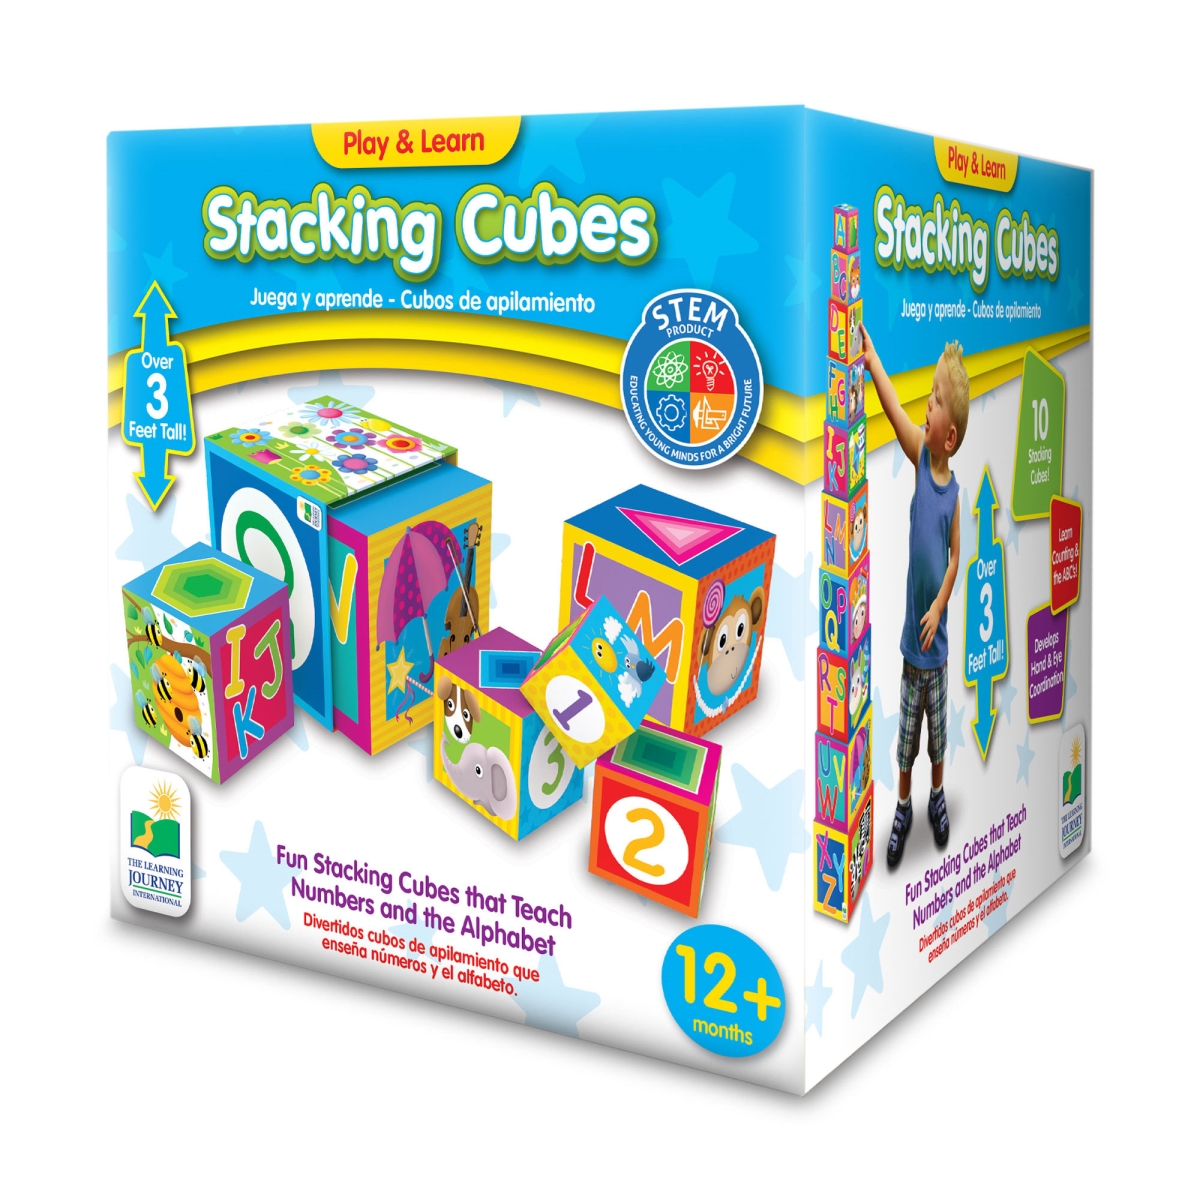 100257 Play & Learn Stacking Cubes